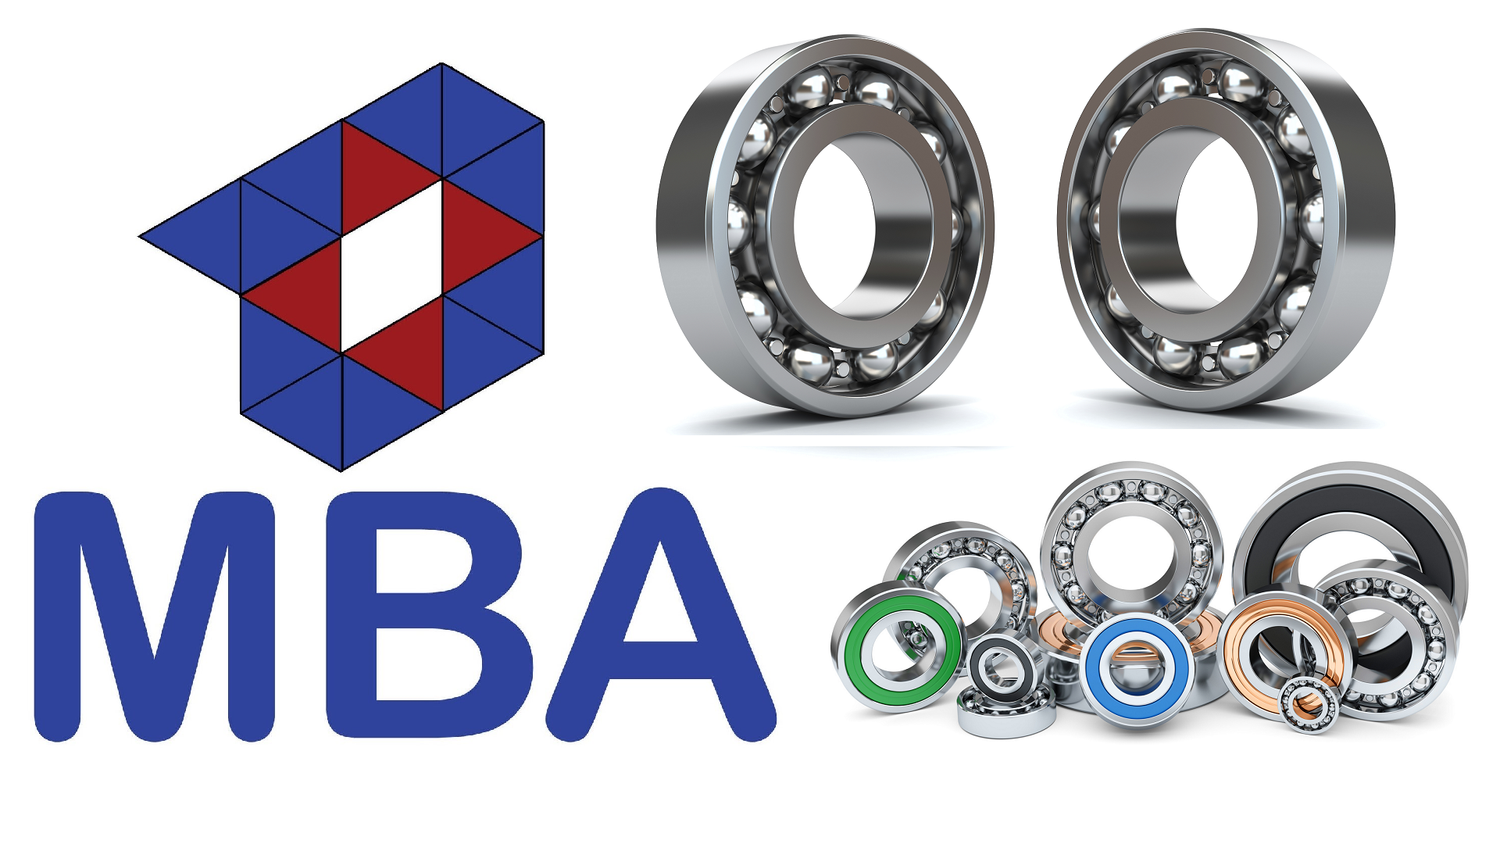 Miniature Bearings Australia for all types of small bearings and engineering supplies.